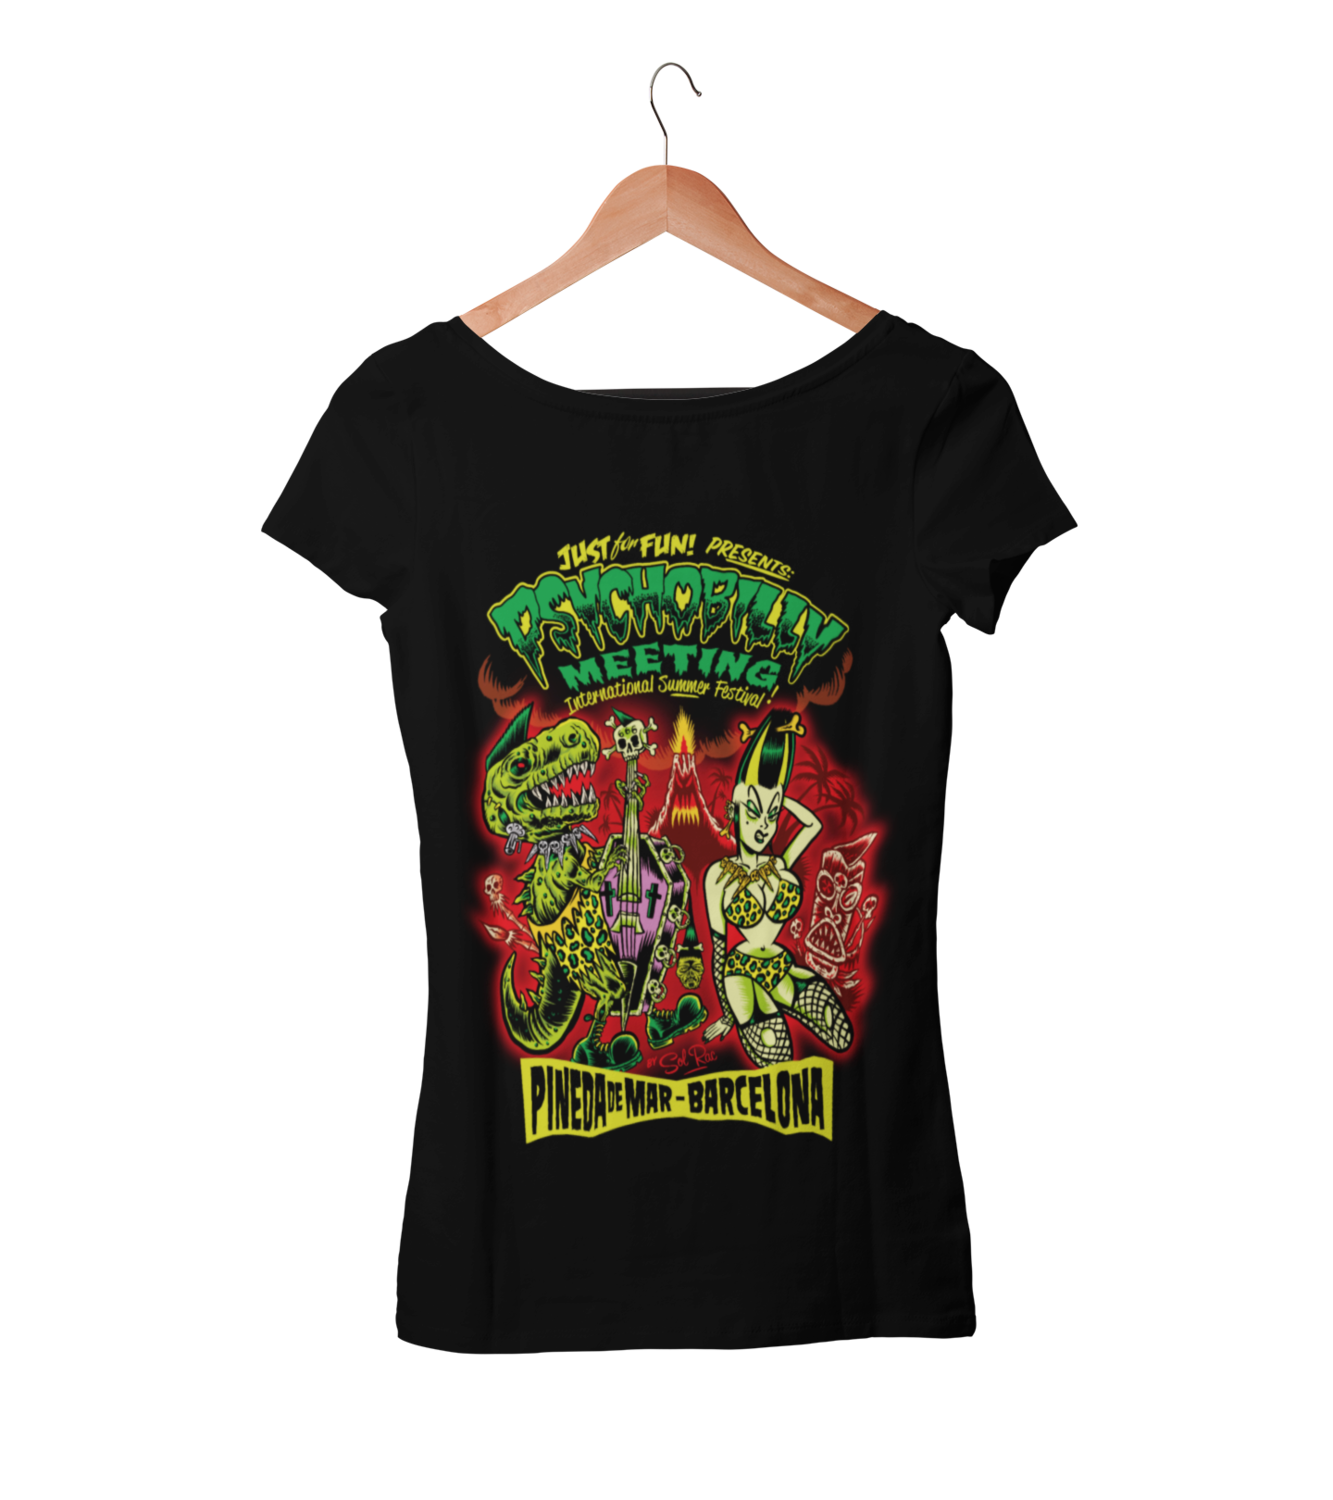 PSYCHOBILLY MEETING 2020 T-SHIRT WOMAN BY SOLRAC